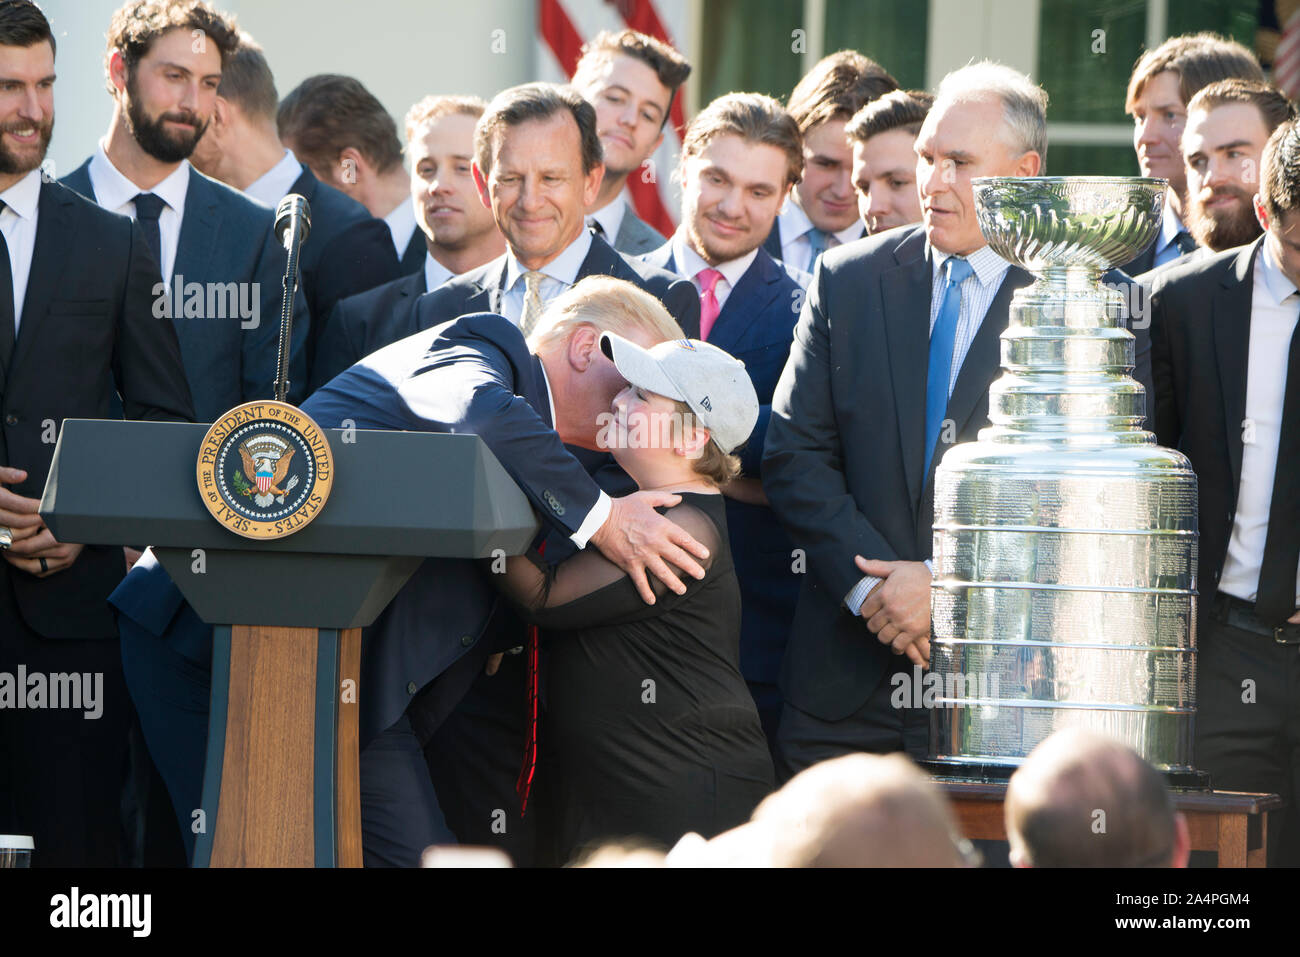 https://c8.alamy.com/comp/2A4PGM4/president-donald-j-trump-welcomes-the-stanley-cup-champions-st-louis-blues-to-the-white-house-during-a-ceremony-in-the-white-house-rose-garden-2A4PGM4.jpg